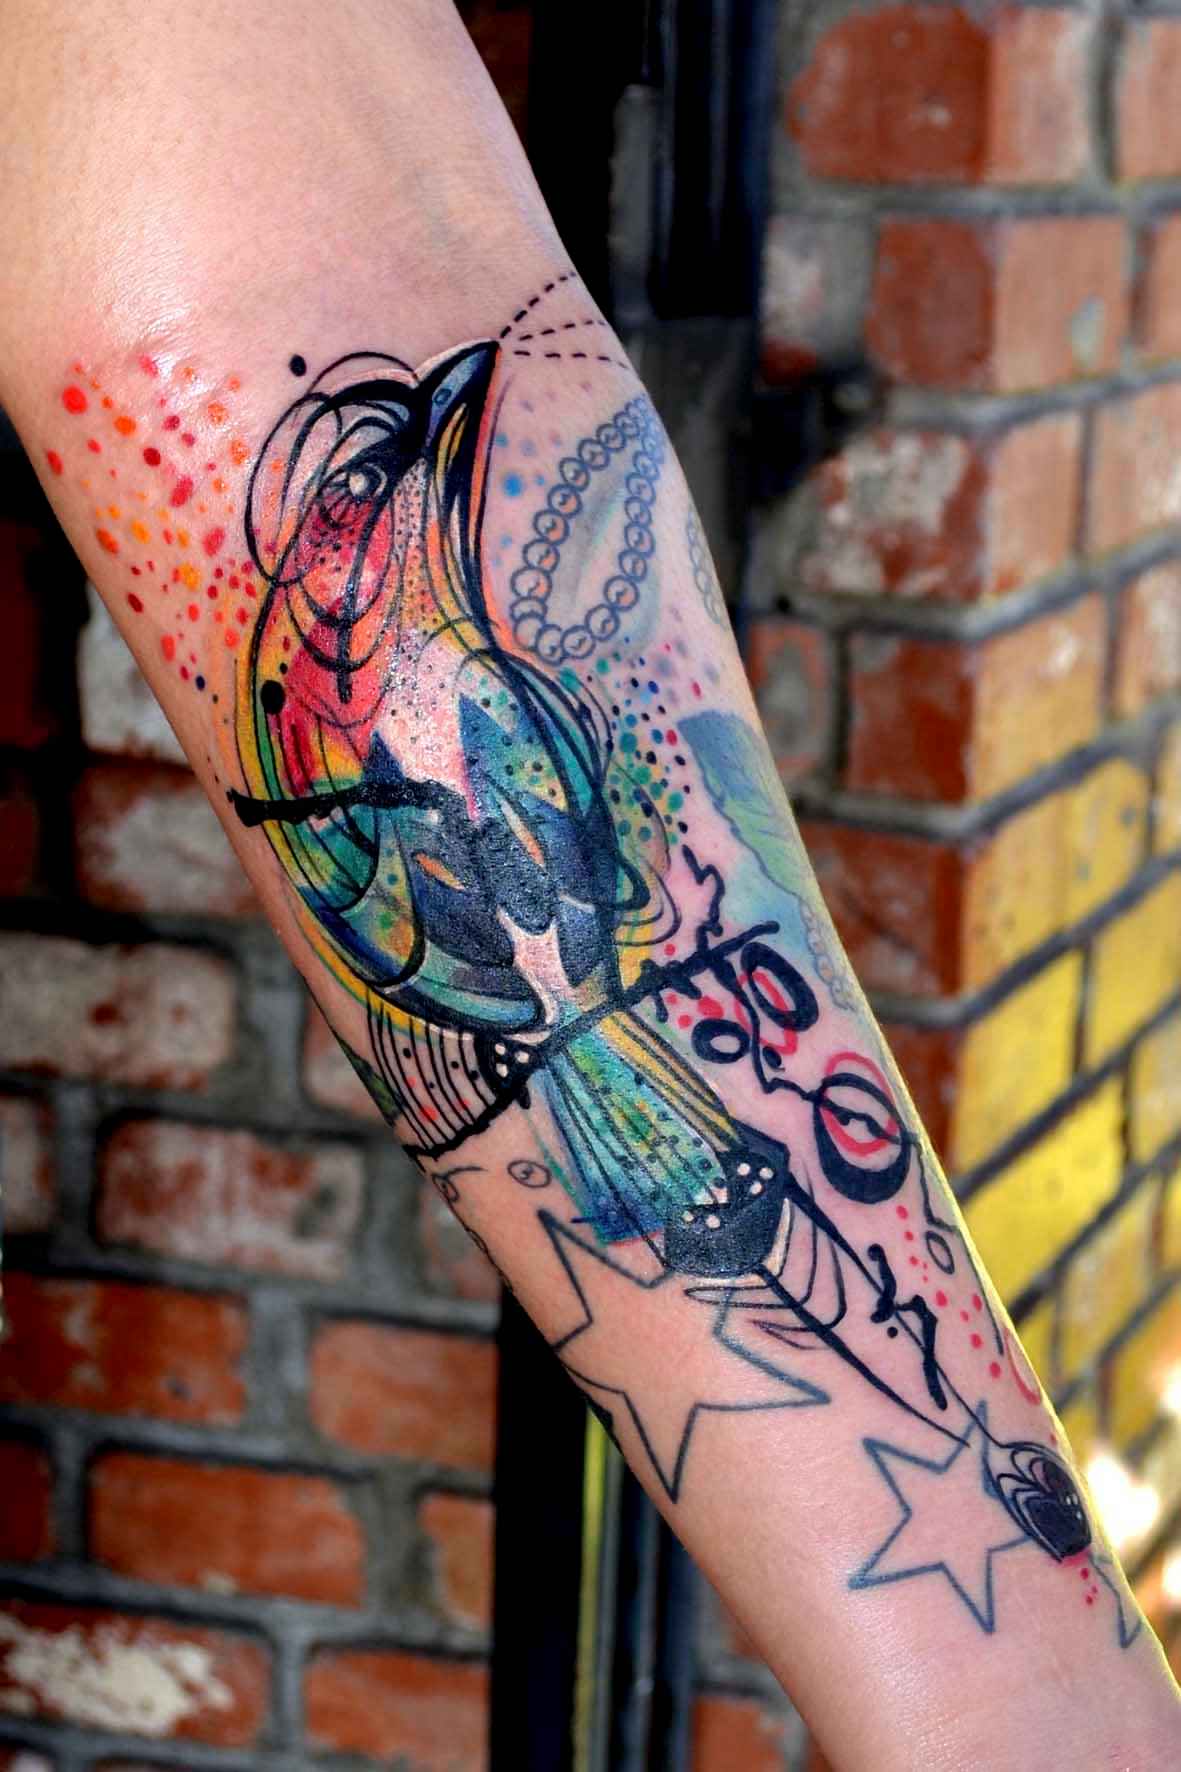 This colorful bird tattoo by Petra works a charm to pull together the